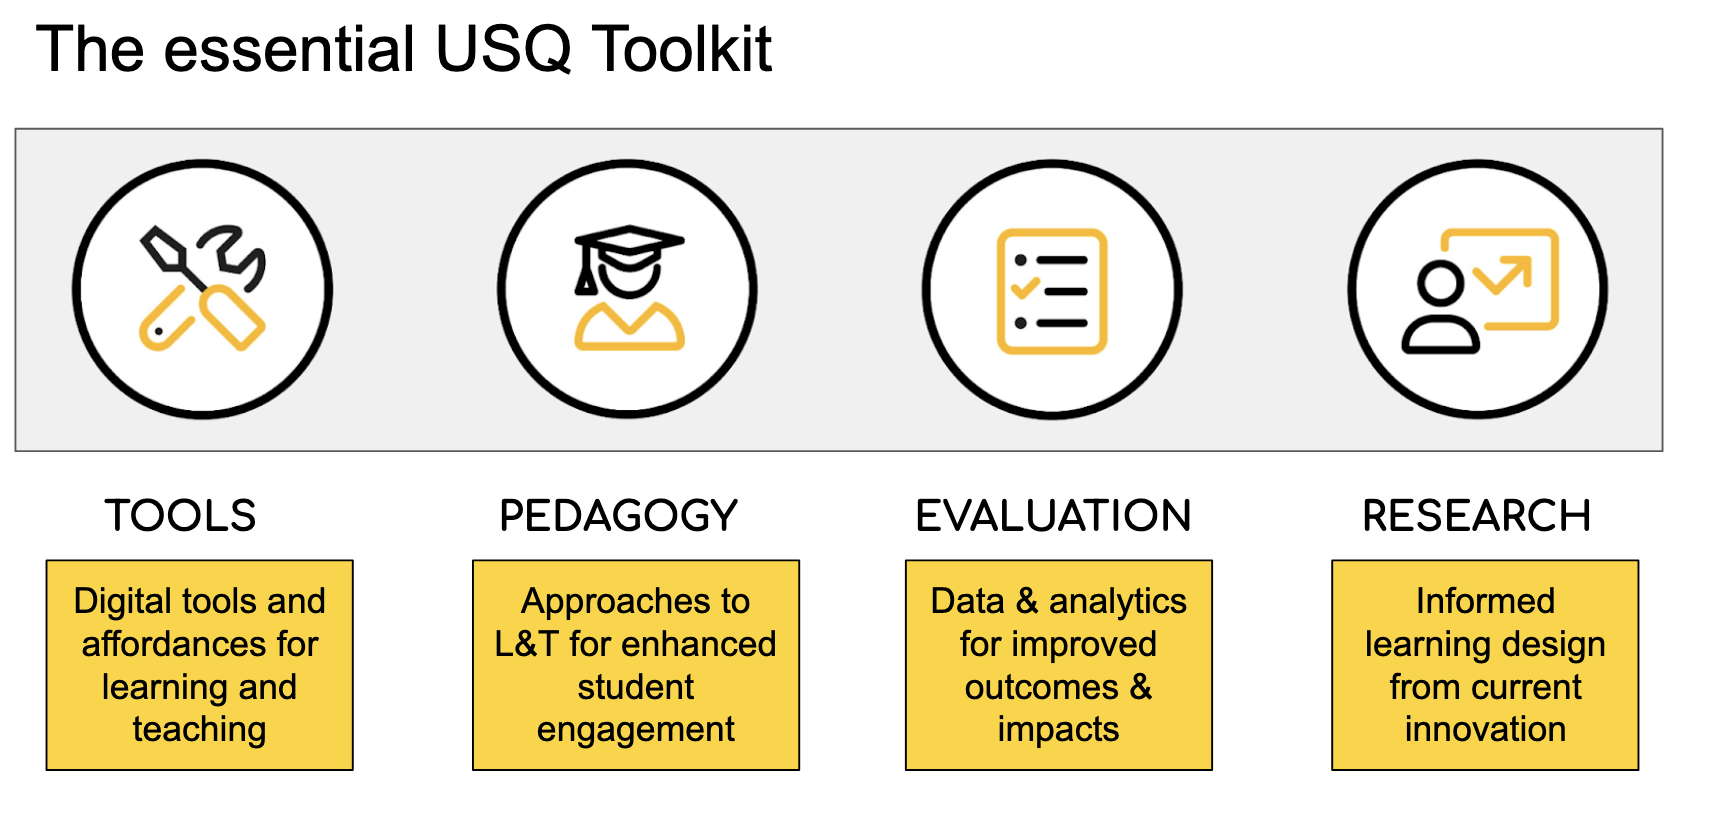 The essential USQ toolkit - Tools, Pedagogy, Evaluation, Research